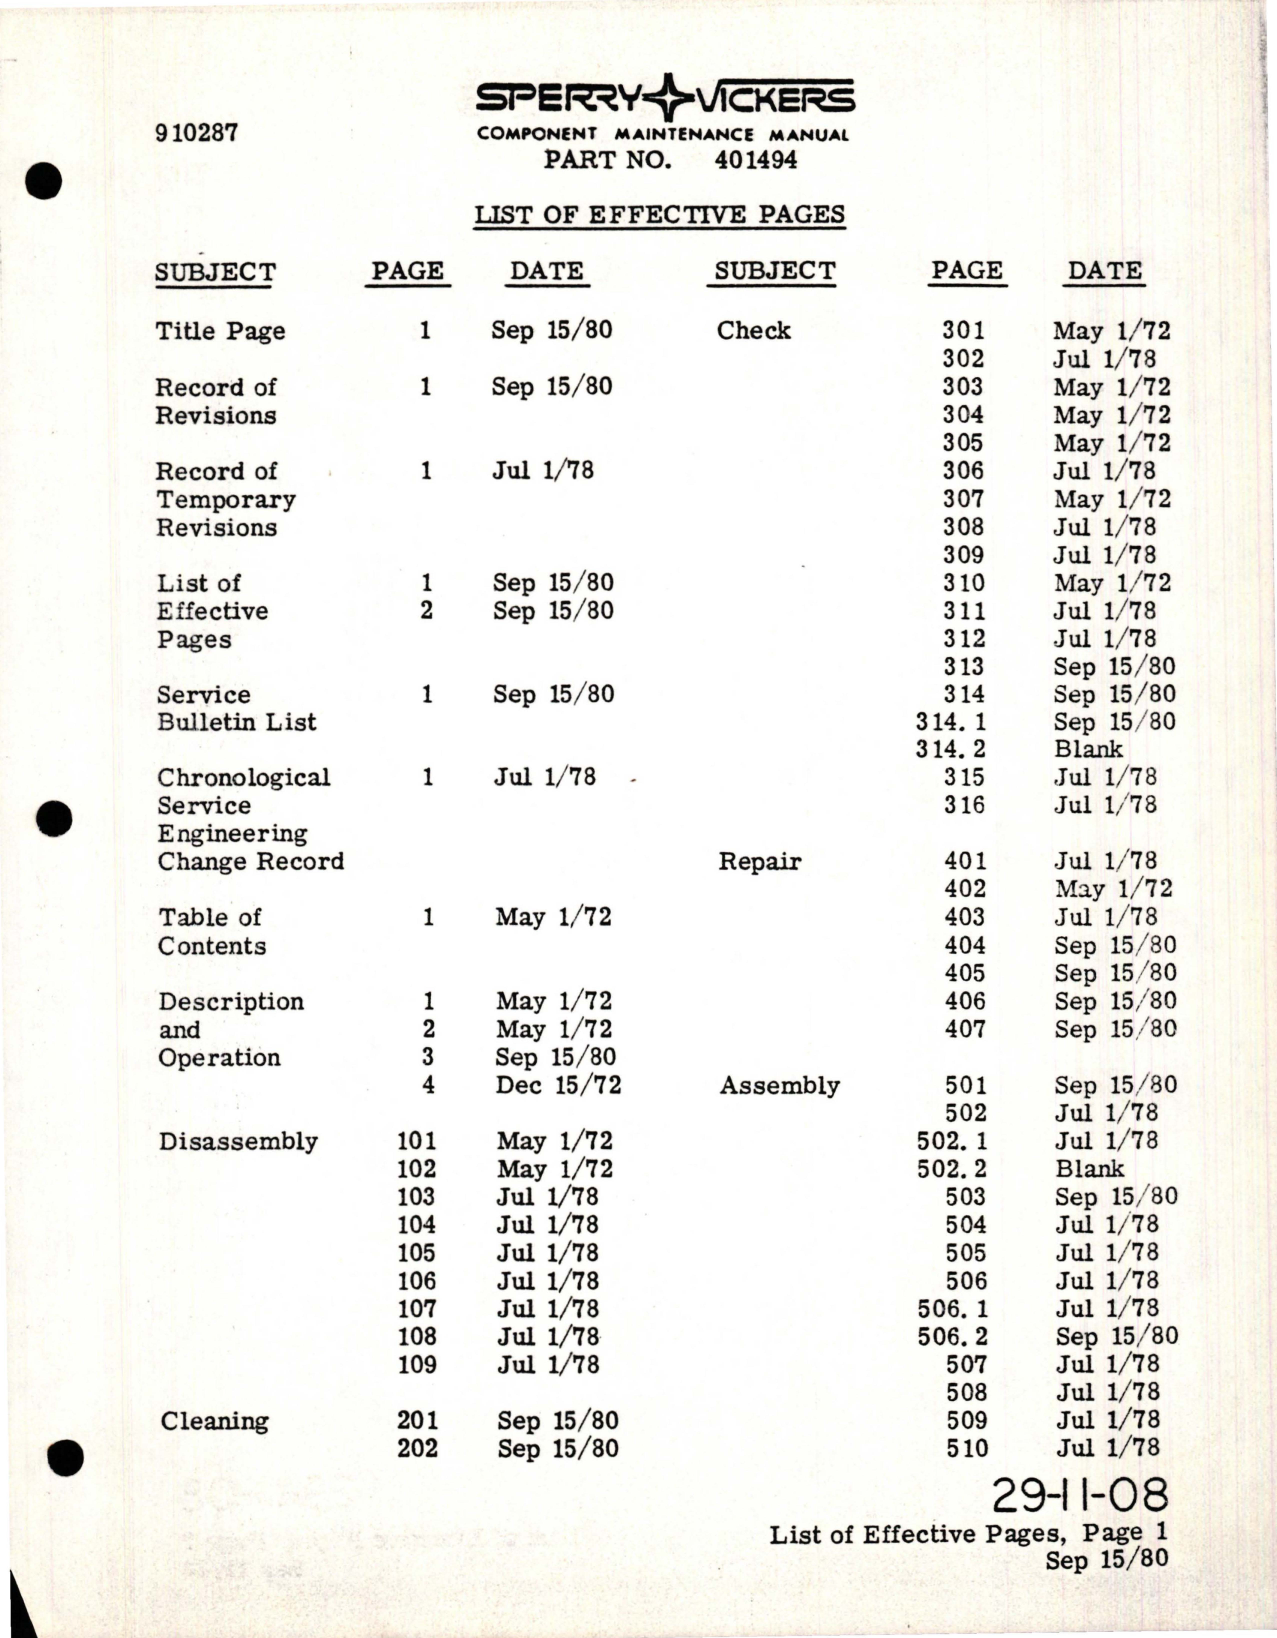 Sample page 7 from AirCorps Library document: Maintenance Manual with Illustrated Parts List for Variable Displacement Hydraulic Motorpump Assy - Model MPEV3-022-14C, MPEV3-022-14D, and MPEV3-022-14E